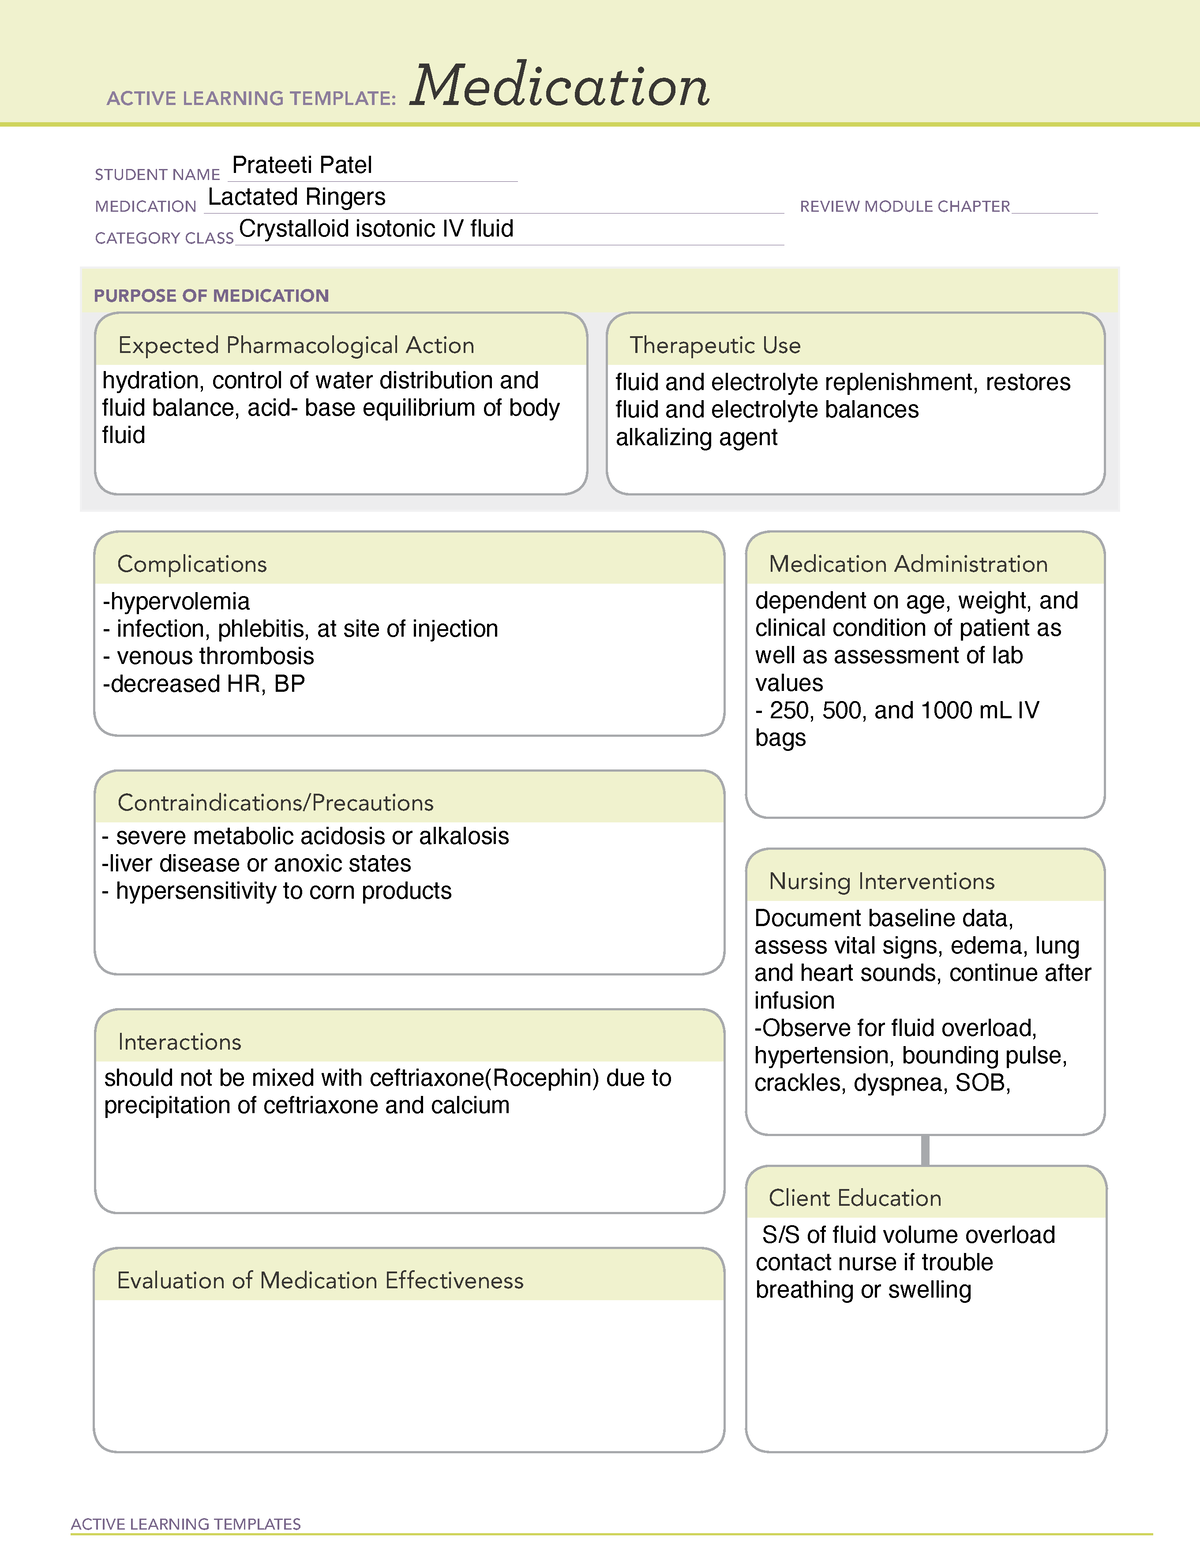 Lactated Ringers Medication Template